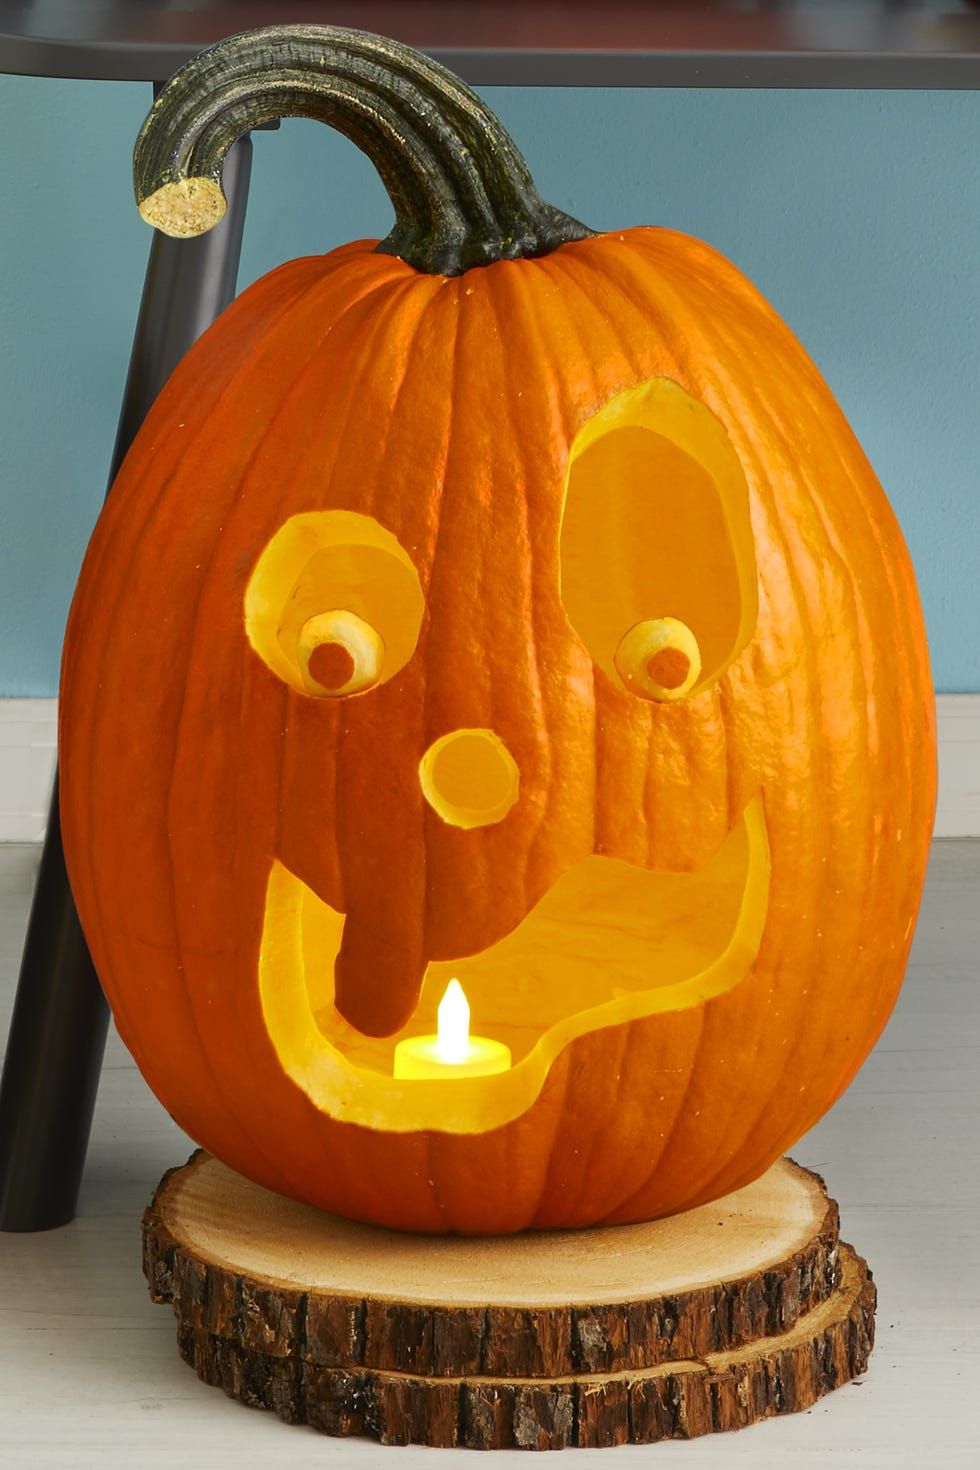 pumpkin carving ideas, carved pumpkin with wide eyes and a goofy grin